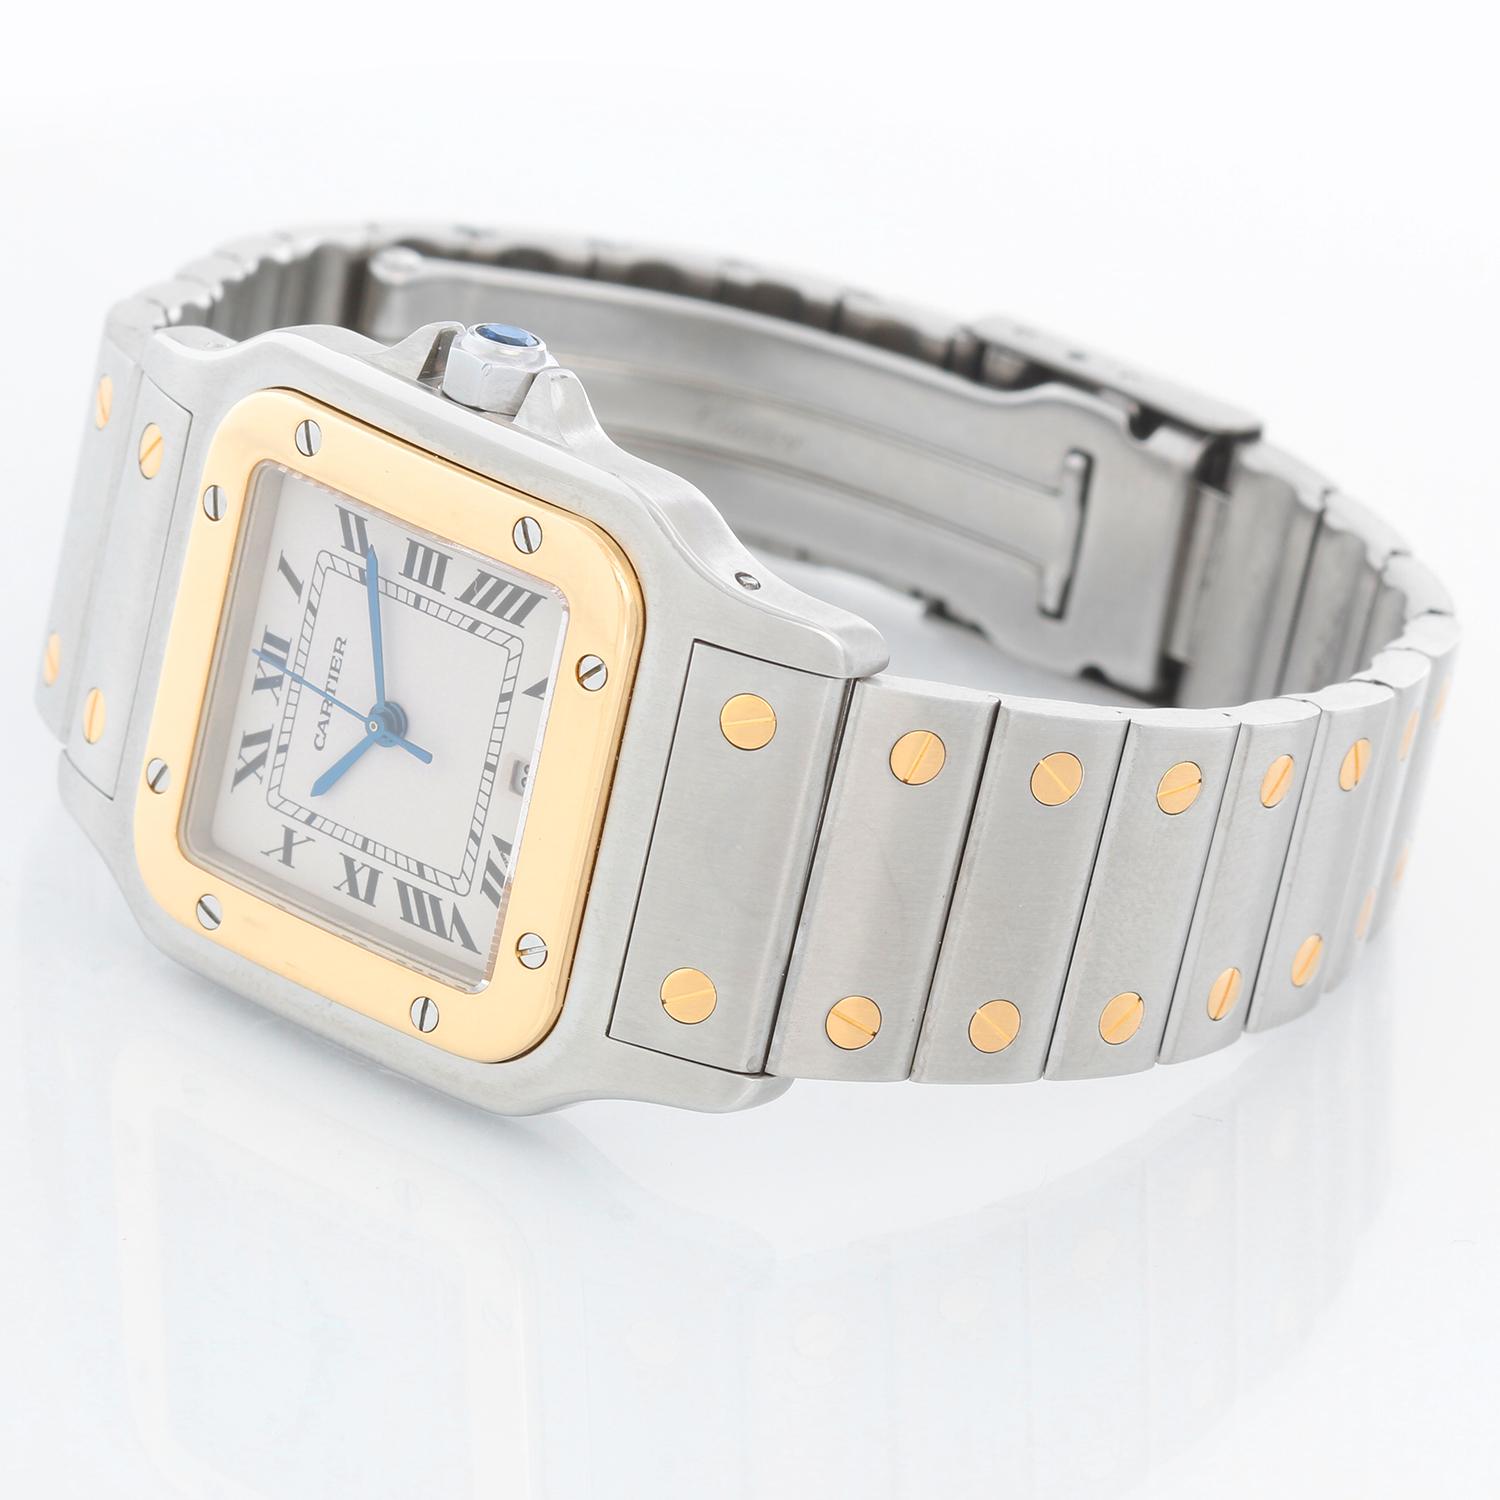 Cartier Santos Galbee Steel & Gold Men's Quartz Watch  - Quartz. Stainless steel case with 18k gold bezel  (28mm x 40mm). Ivory colored dial with black Roman numerals; date at 6 o'clock. Stainless steel and 18k gold Santos bracelet. Pre-owned with